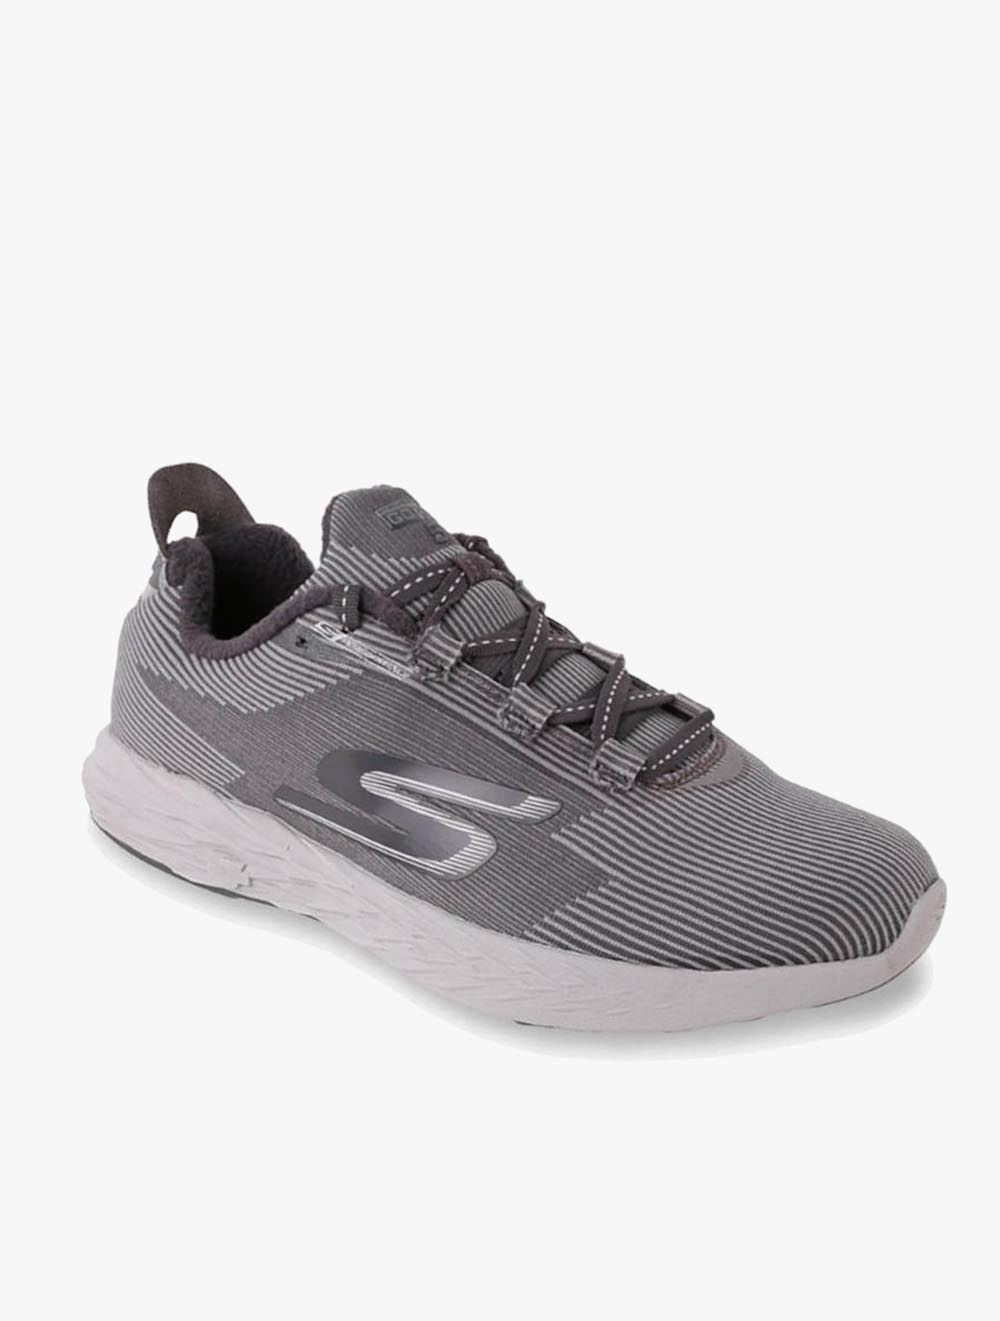 skechers gorun 5 gotherm 360 Sale,up to 